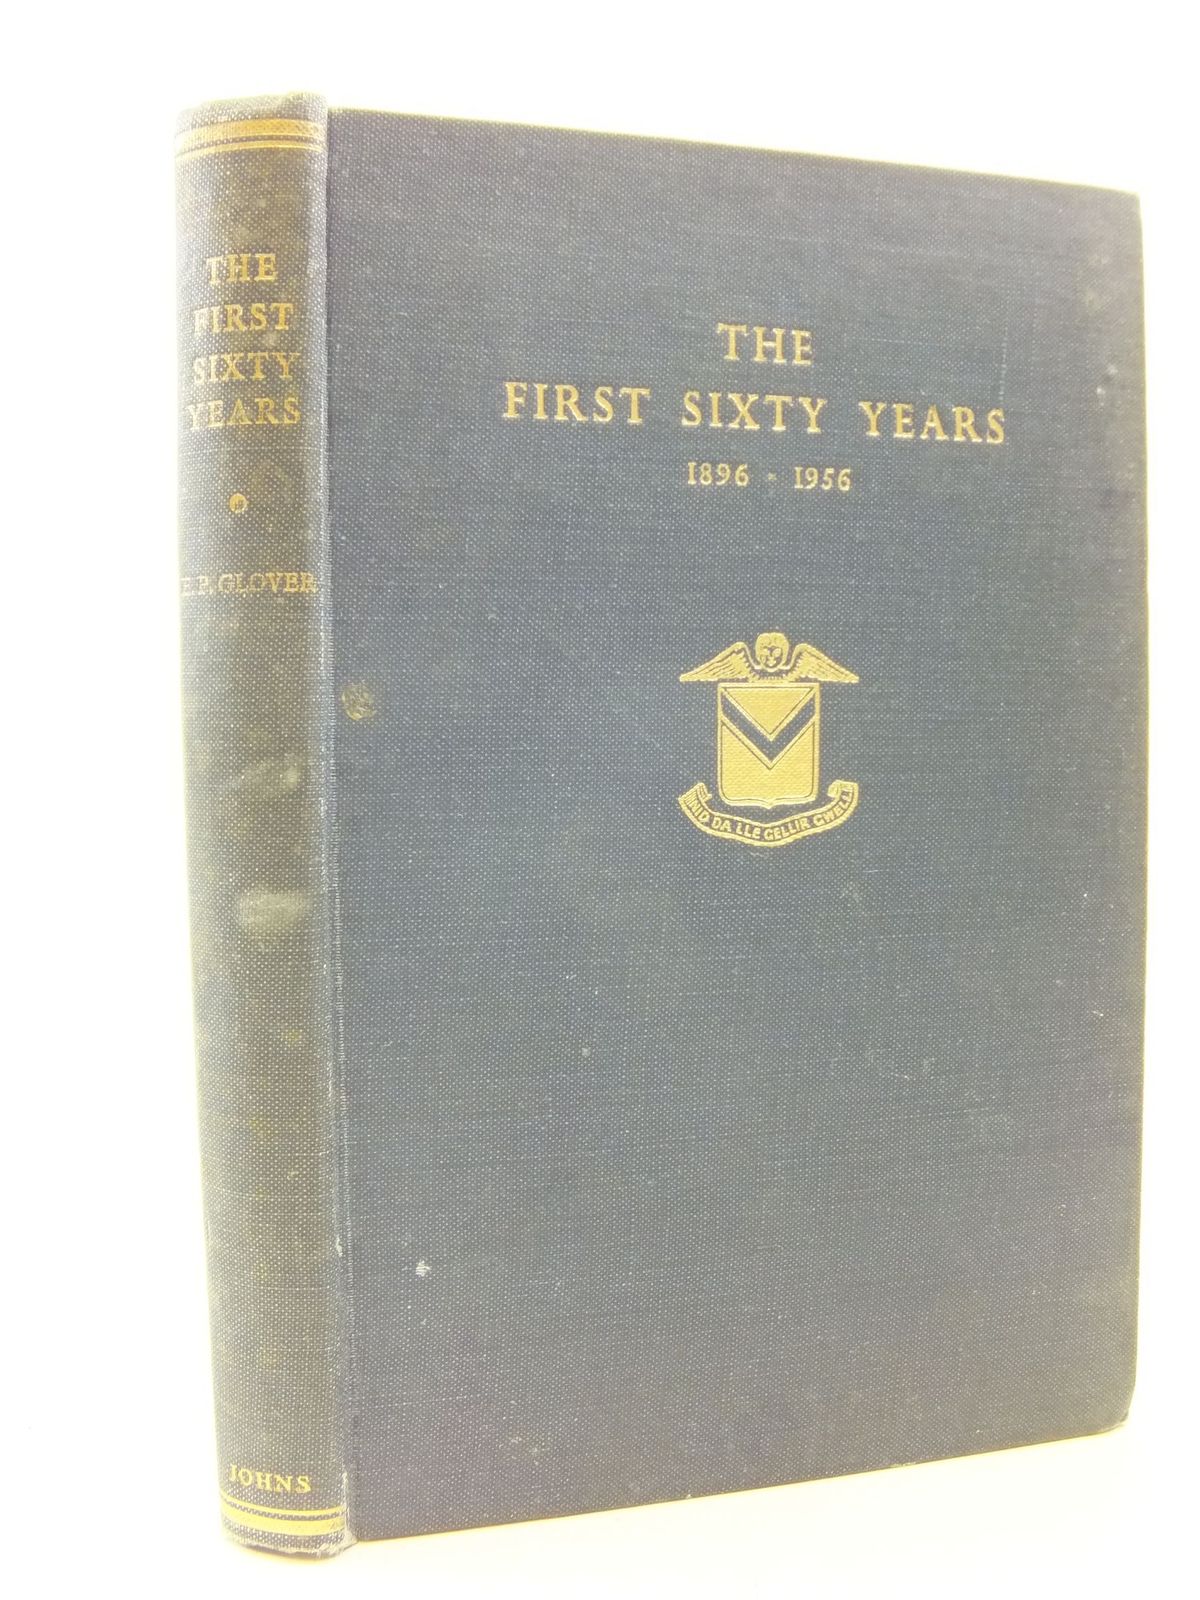 Photo of THE FIRST SIXTY YEARS 1896-1956 written by Glover, E.P. published by R.H. Johns Limited (STOCK CODE: 2113641)  for sale by Stella & Rose's Books